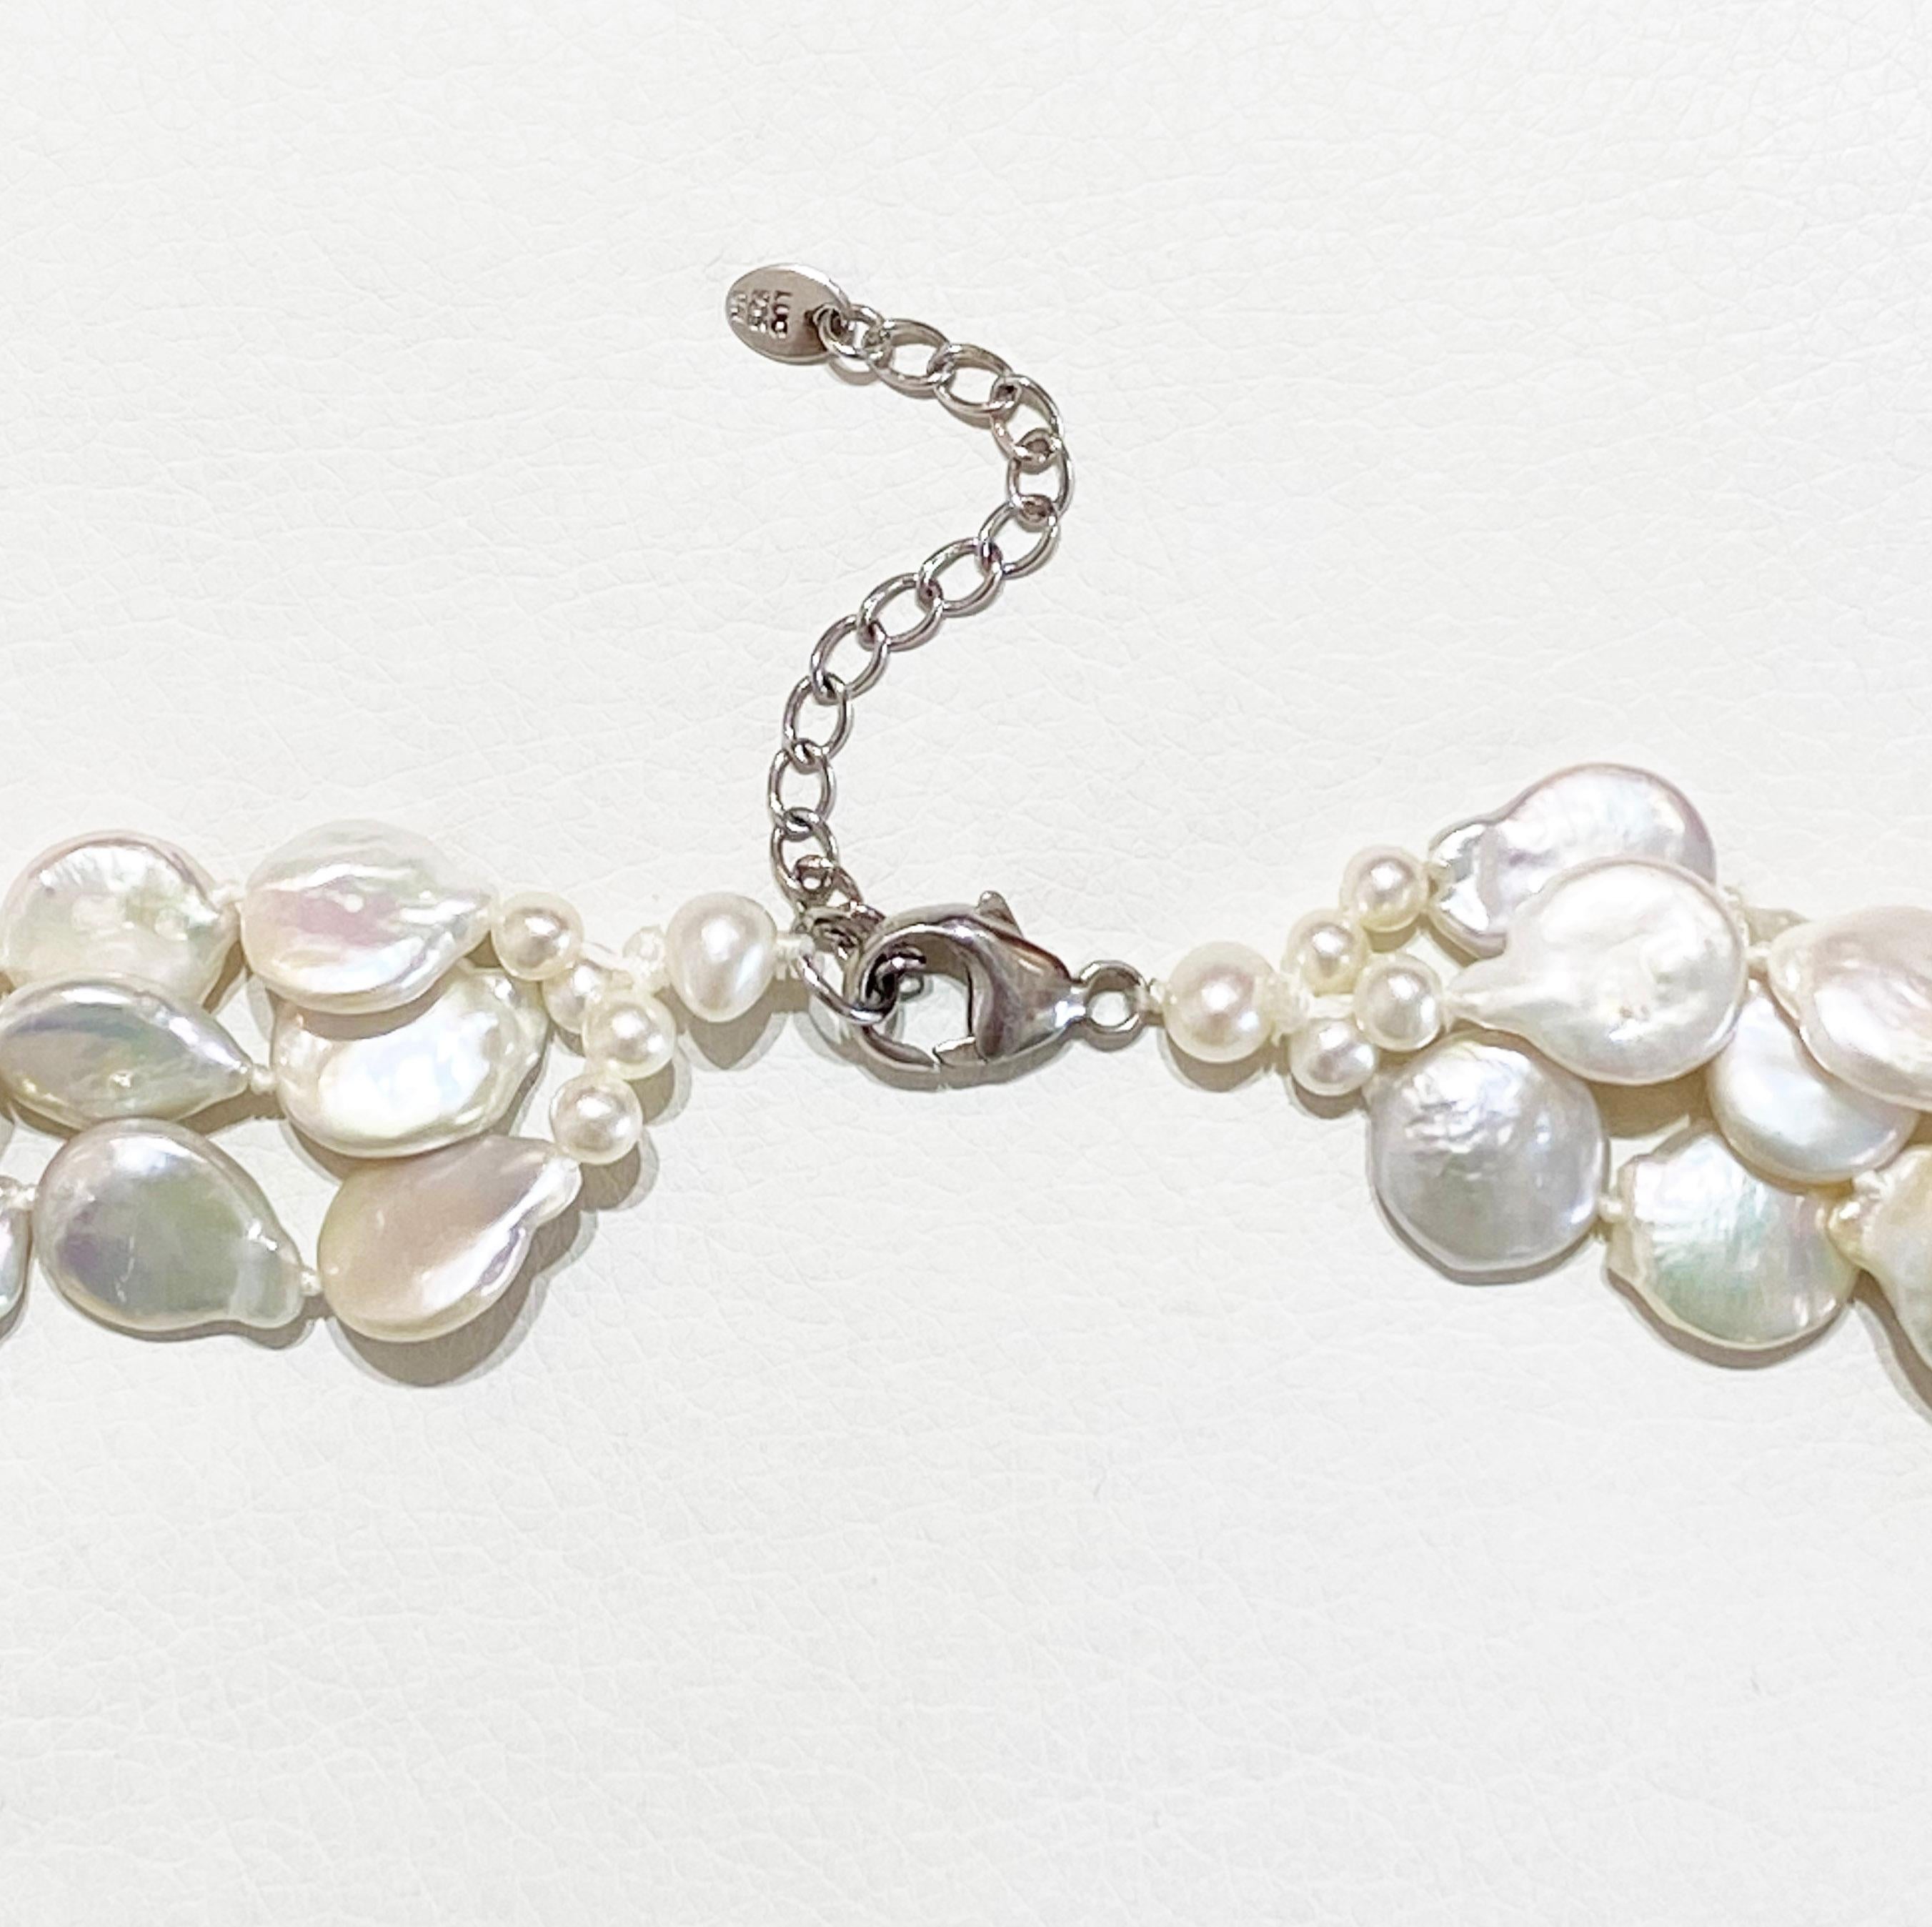 Artisan Freshwater Coin Pearl Necklace, Multi-Strand Pearl Necklace in Sterling Silver